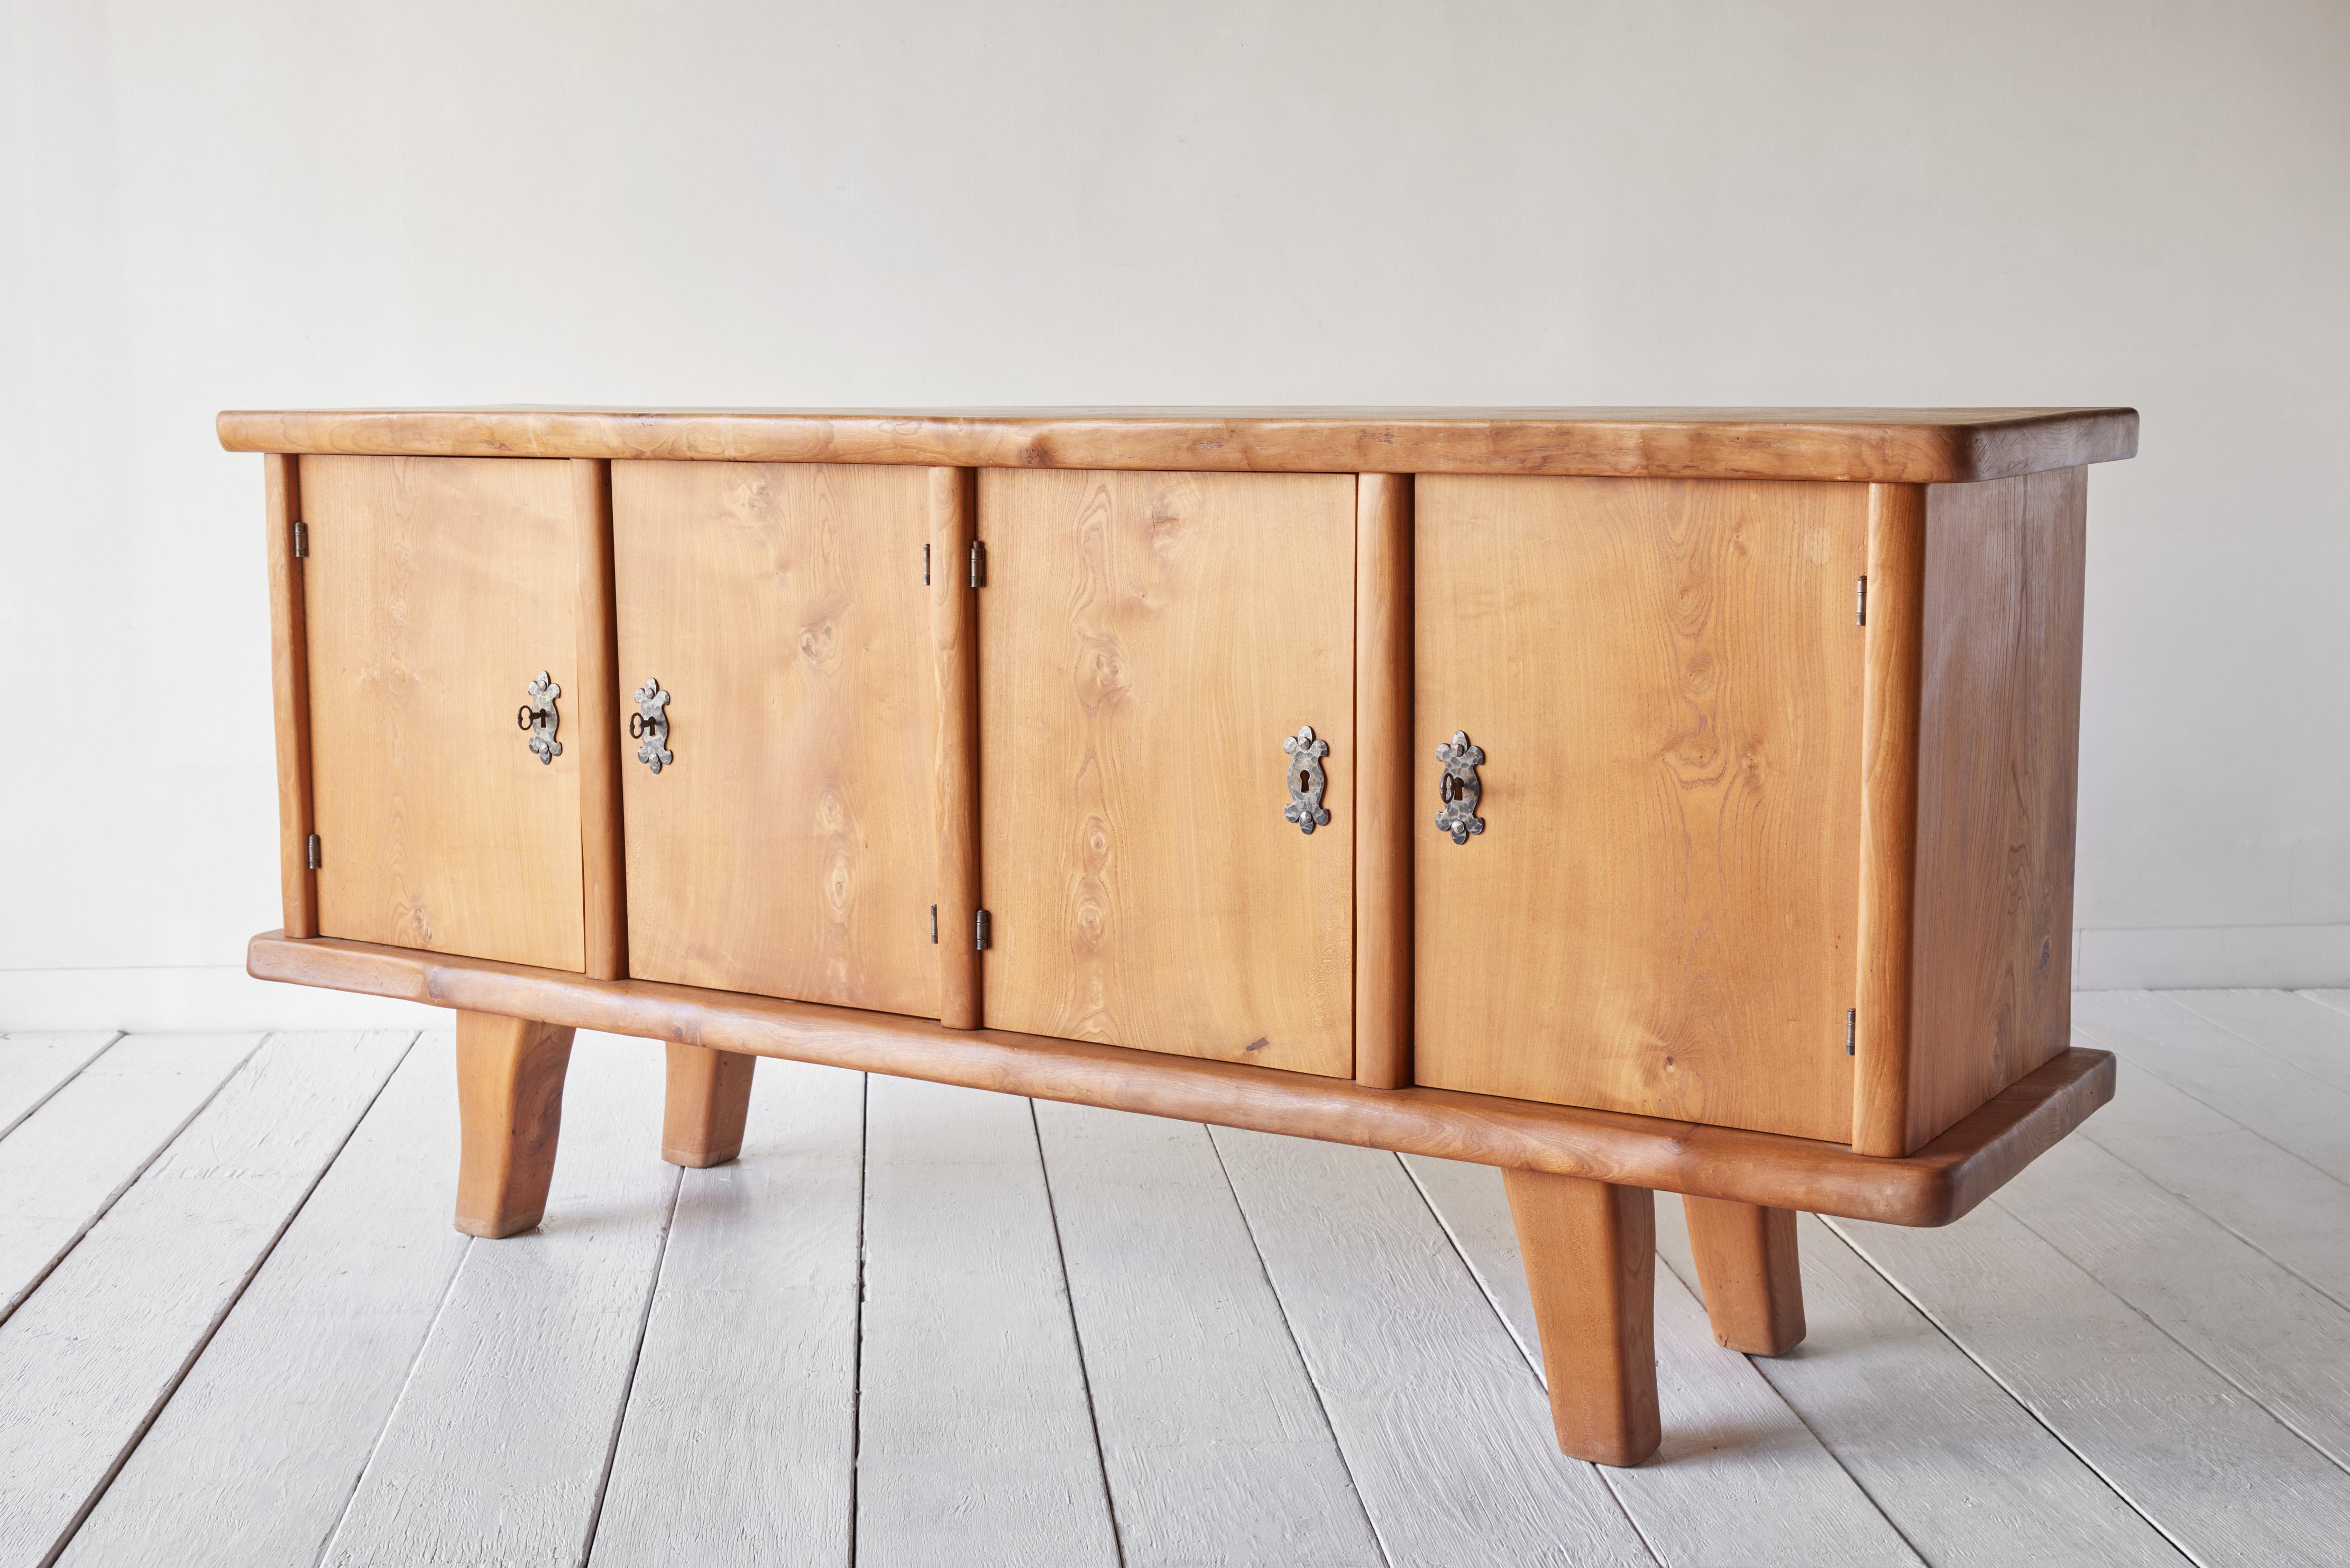 Solid oak credenza circa 1960 with hand forged iron hardware.
     